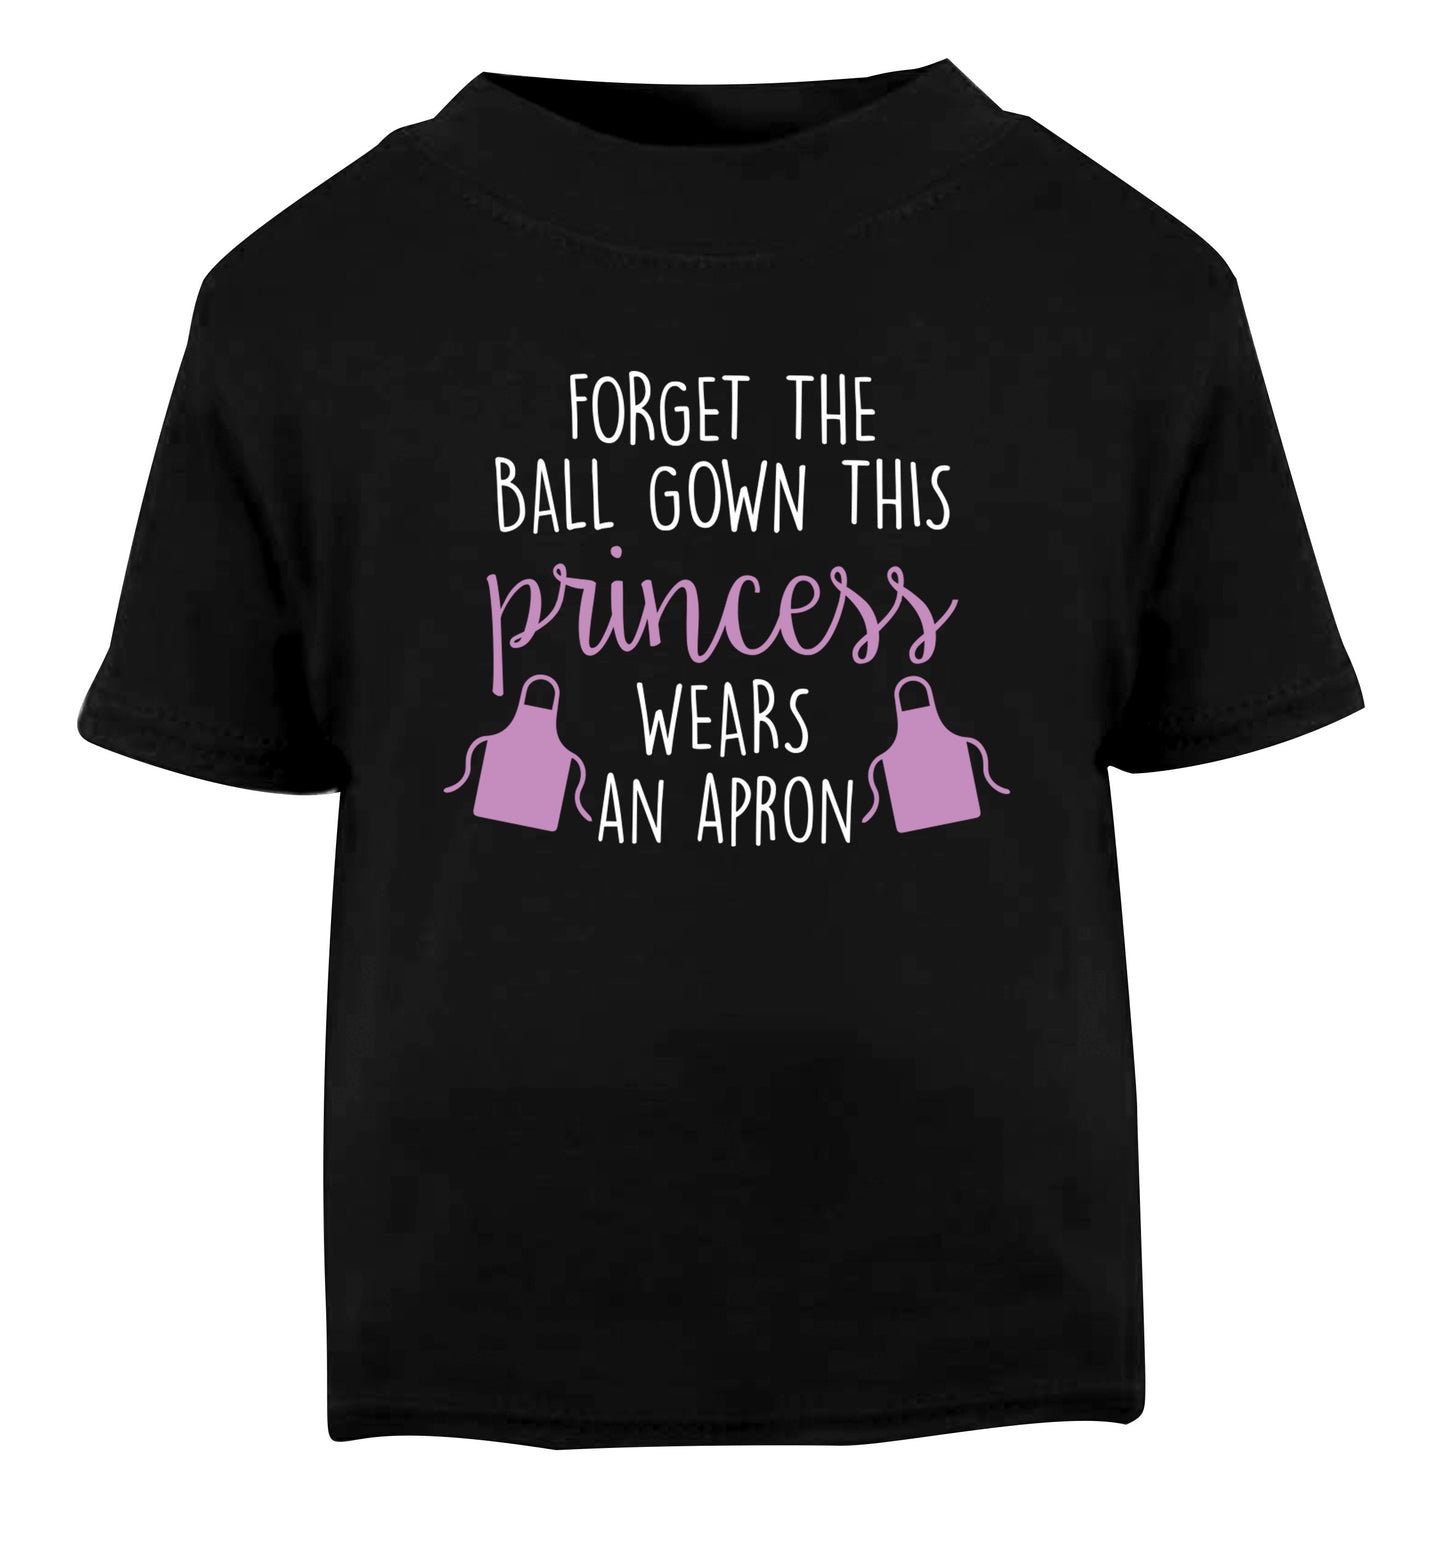 Forget the ball gown this princess wears an apron Black Baby Toddler Tshirt 2 years